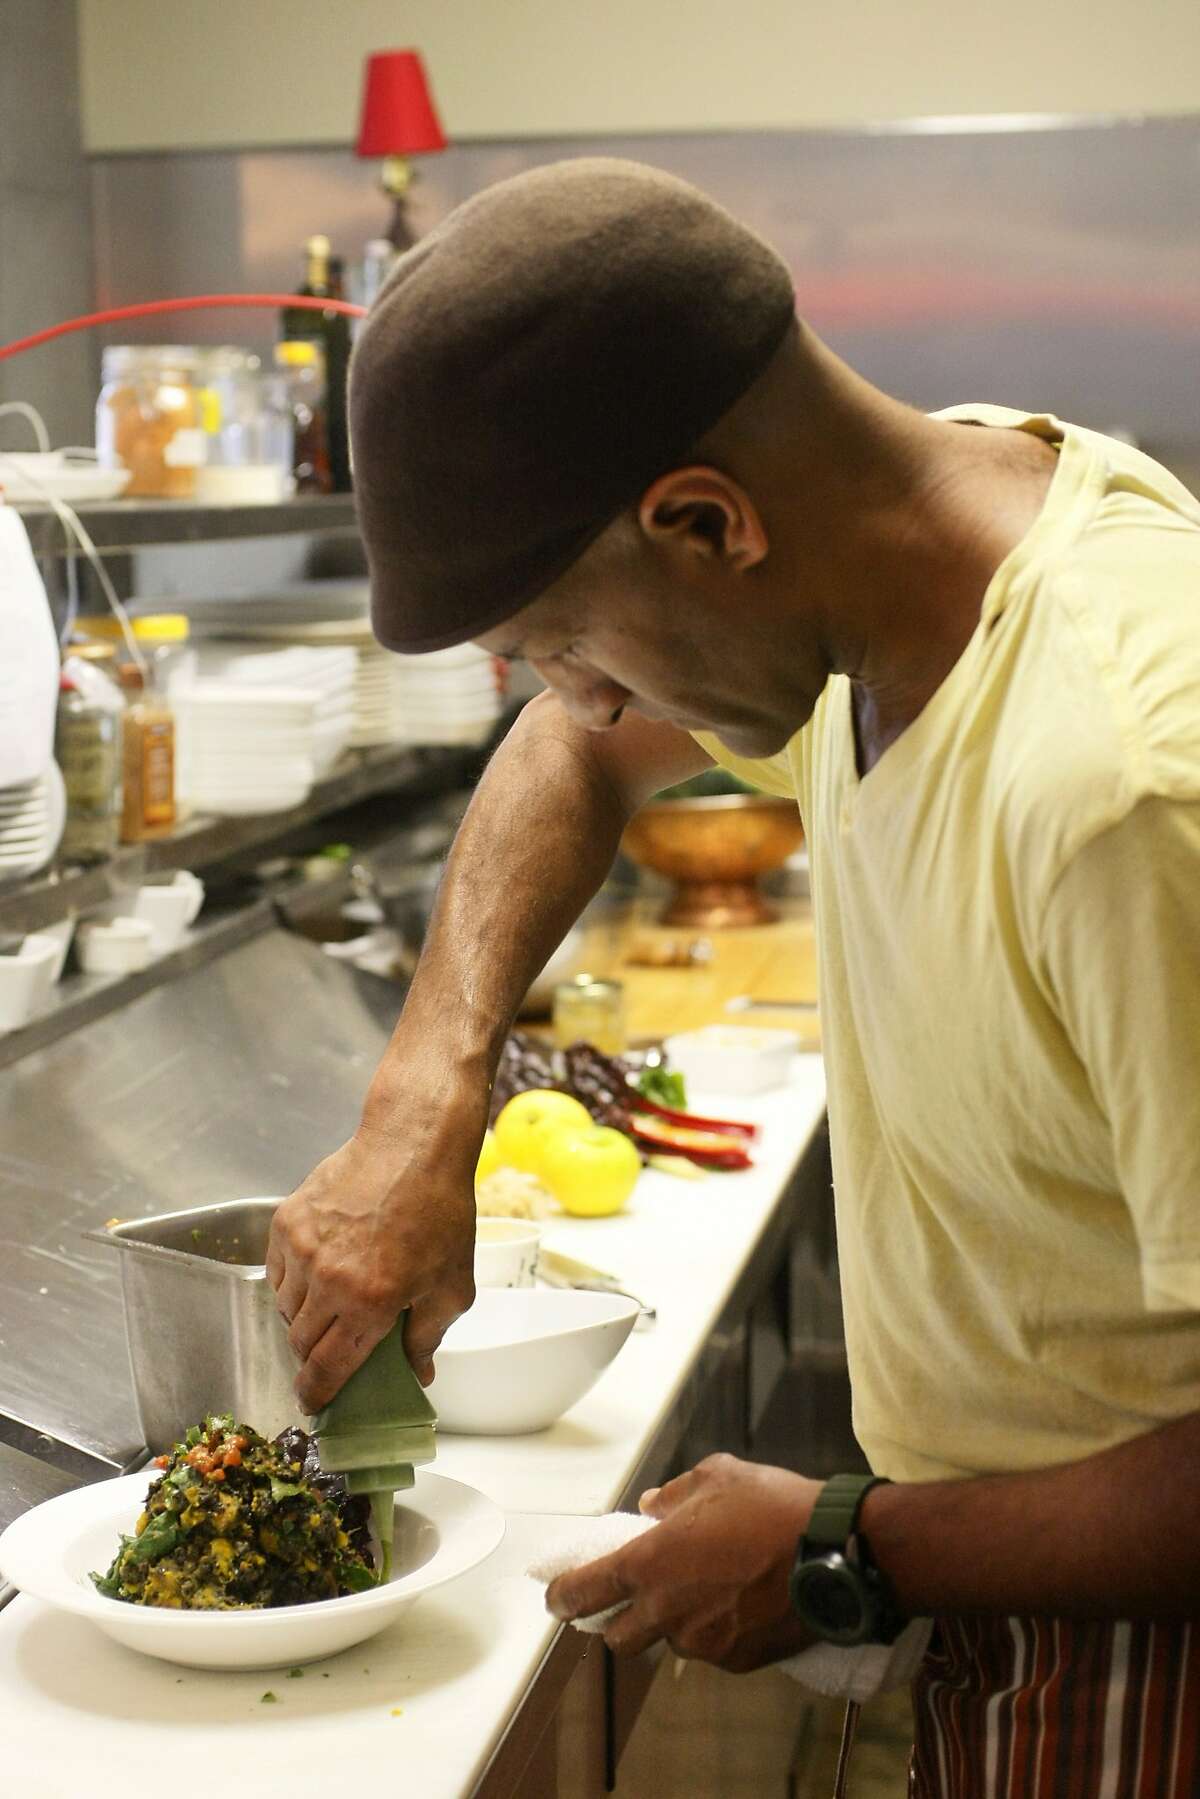 Chef Eskender Aseged focuses on fresh food that has been minimally processed to pay homage to his Ethiopian roots.